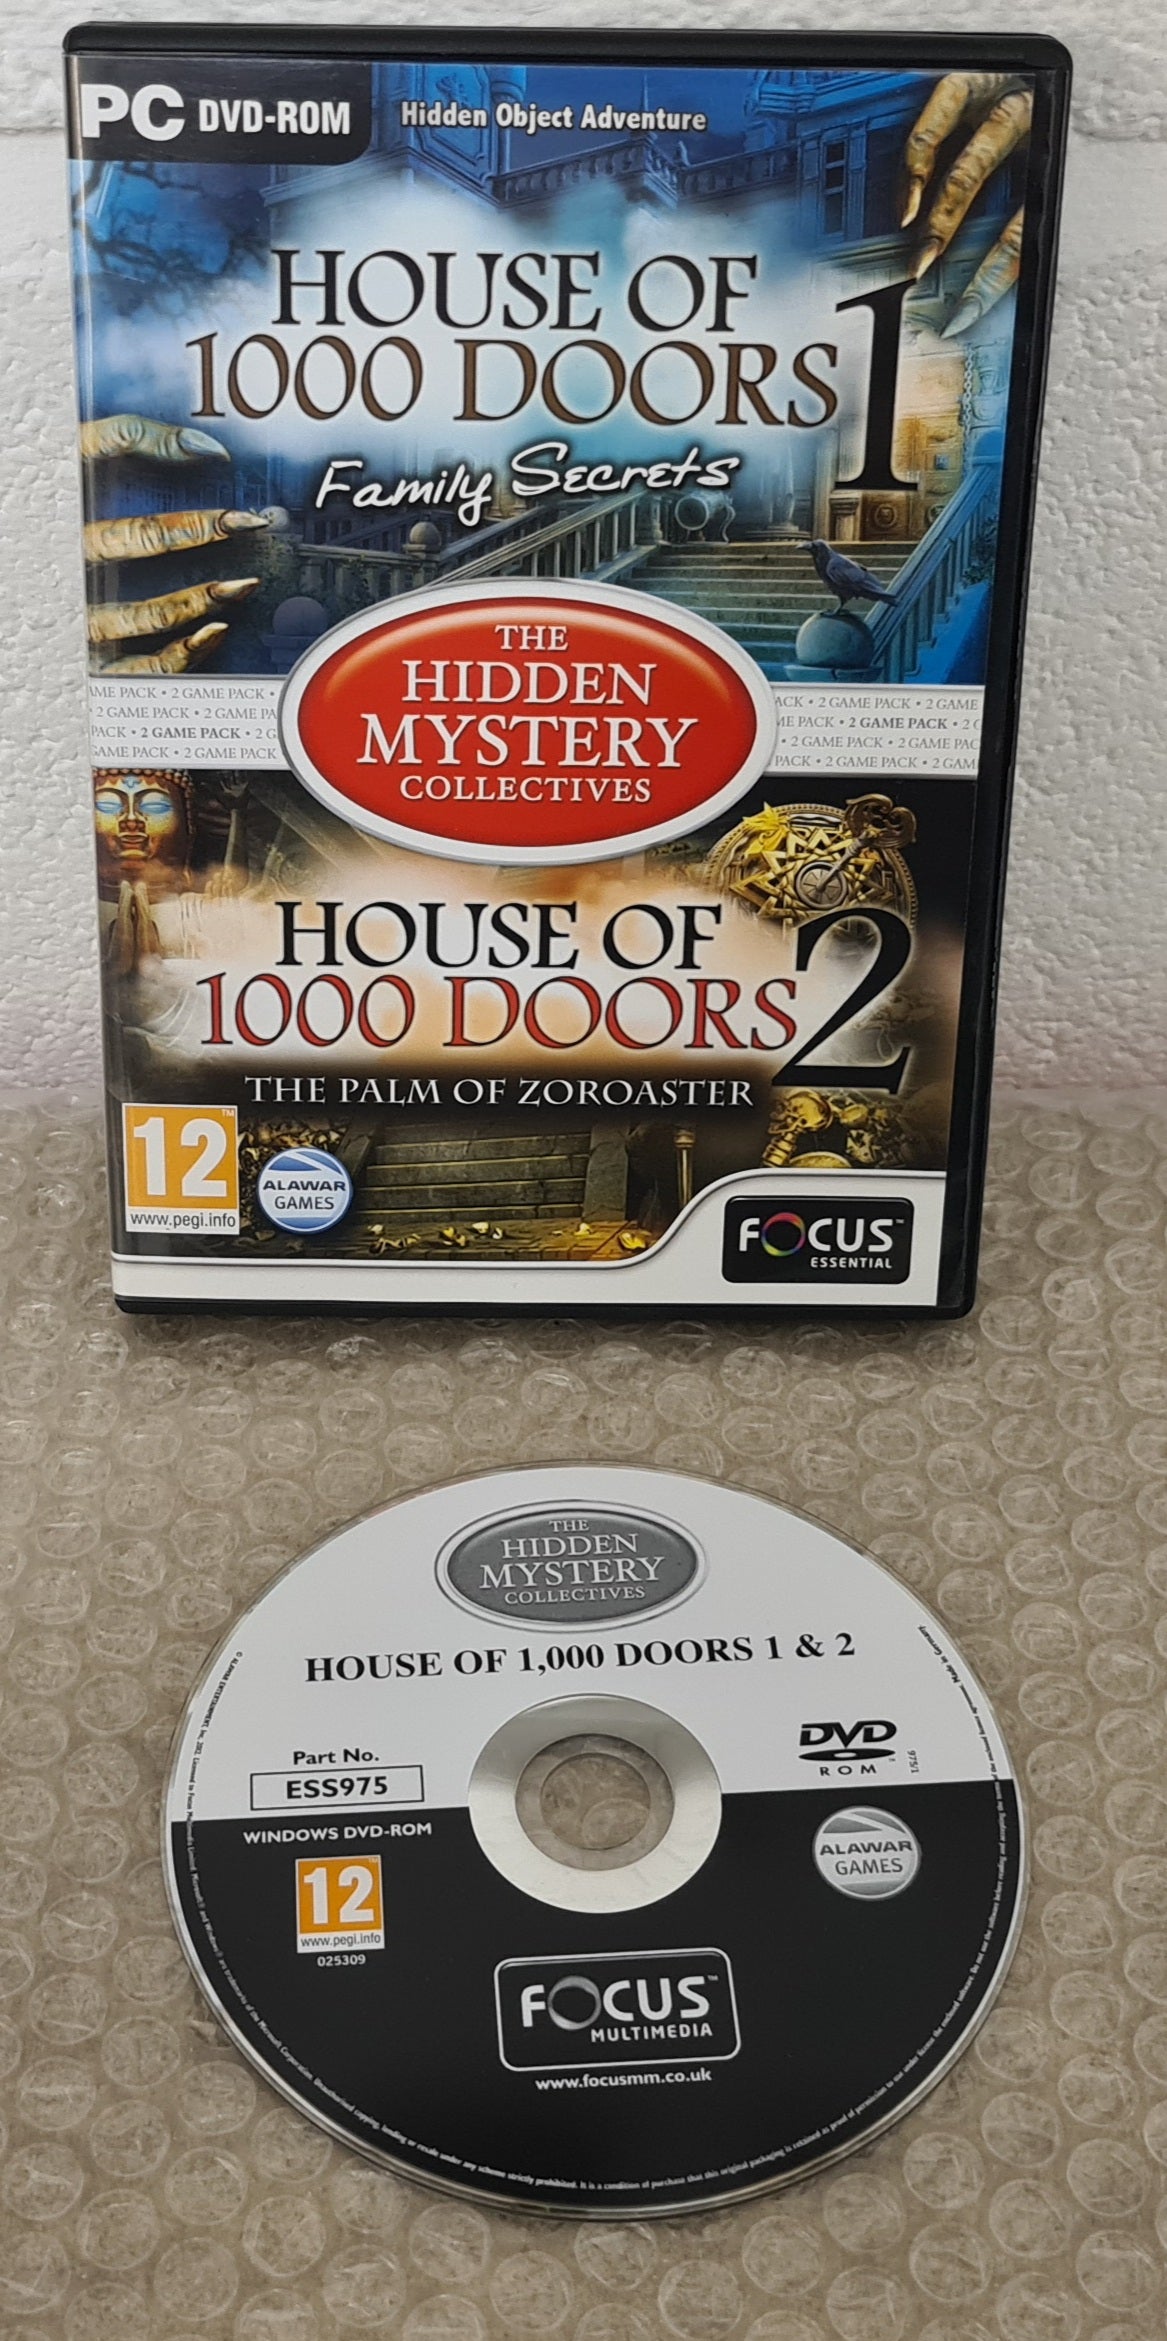 House of 1000 Doors 1 & 2 Double Pack PC Game